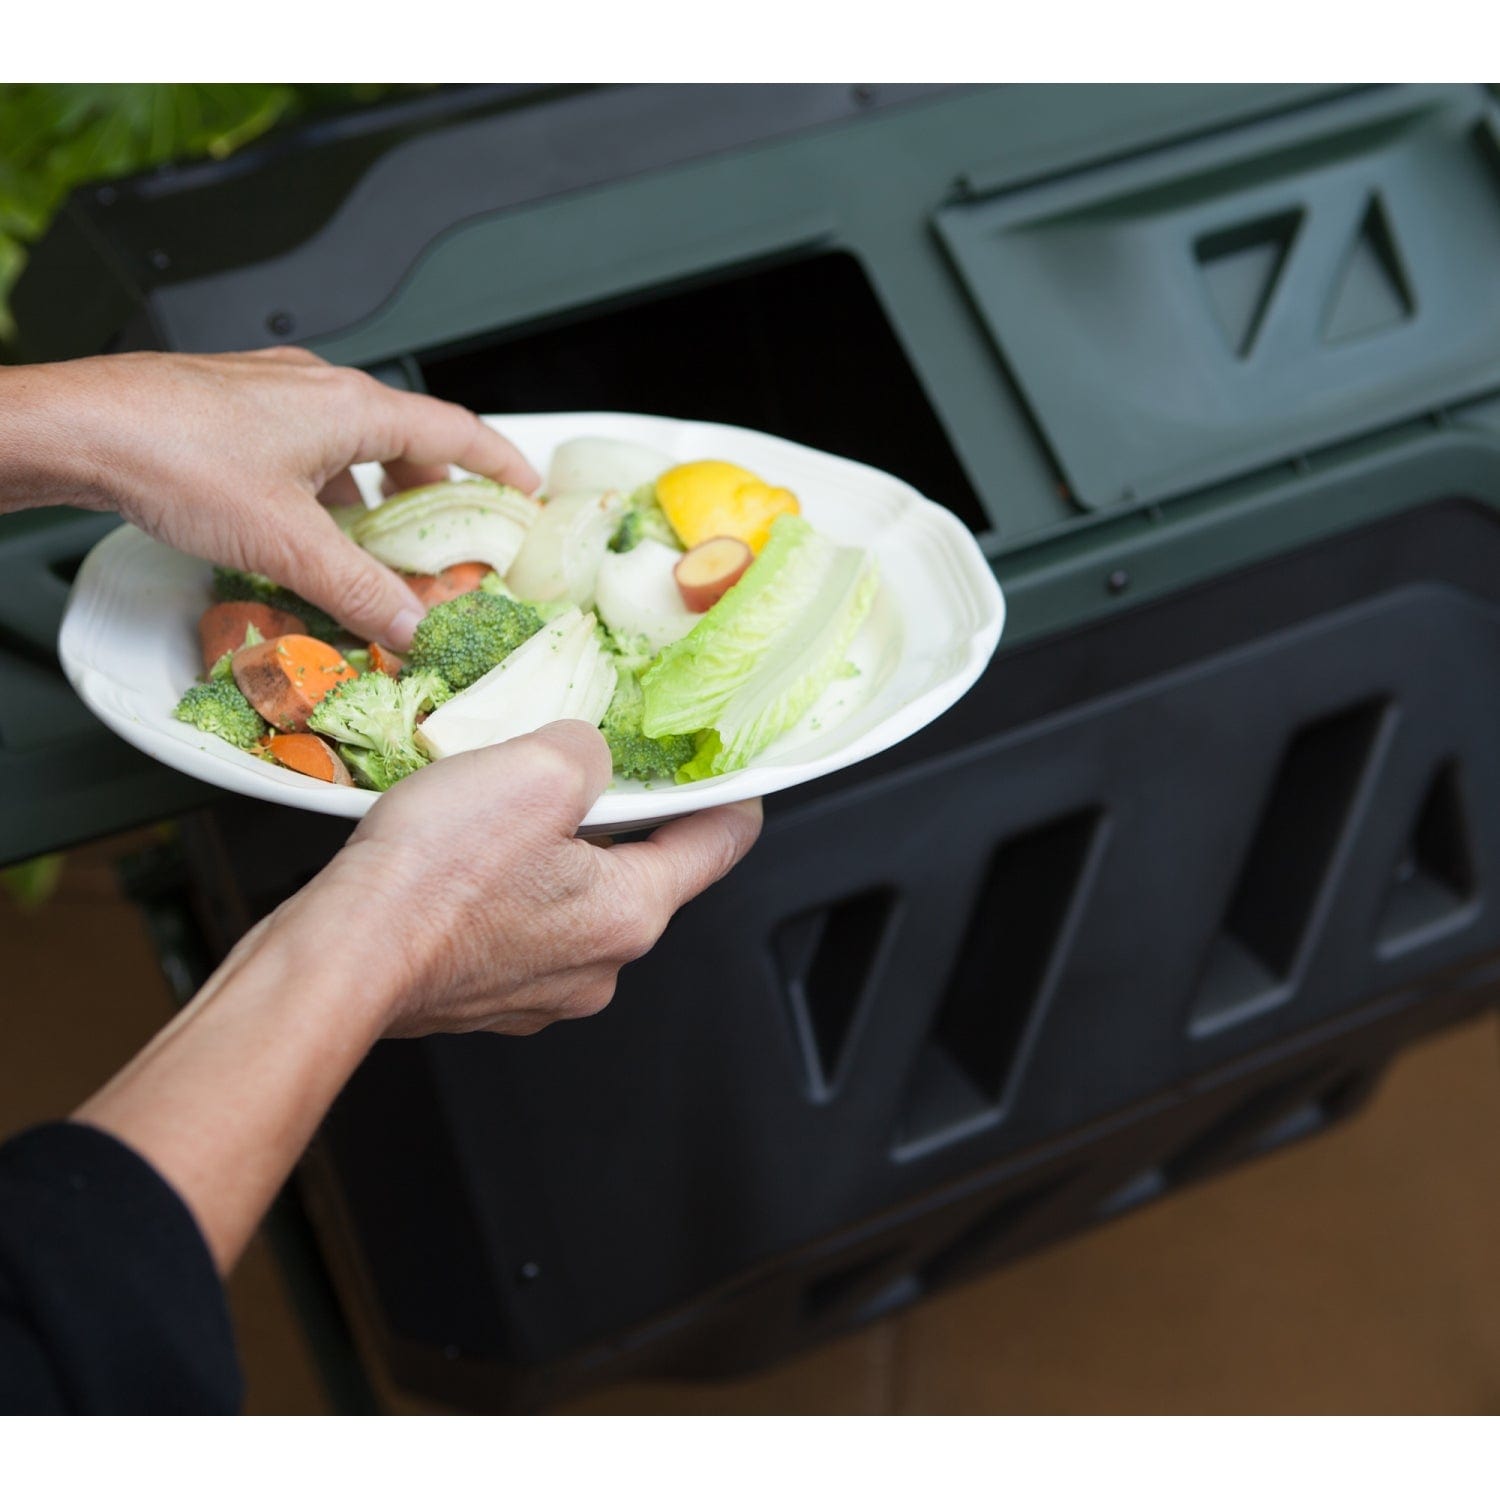 Exaco Composters Exaco | Mr. Spin® Compost Tumbler